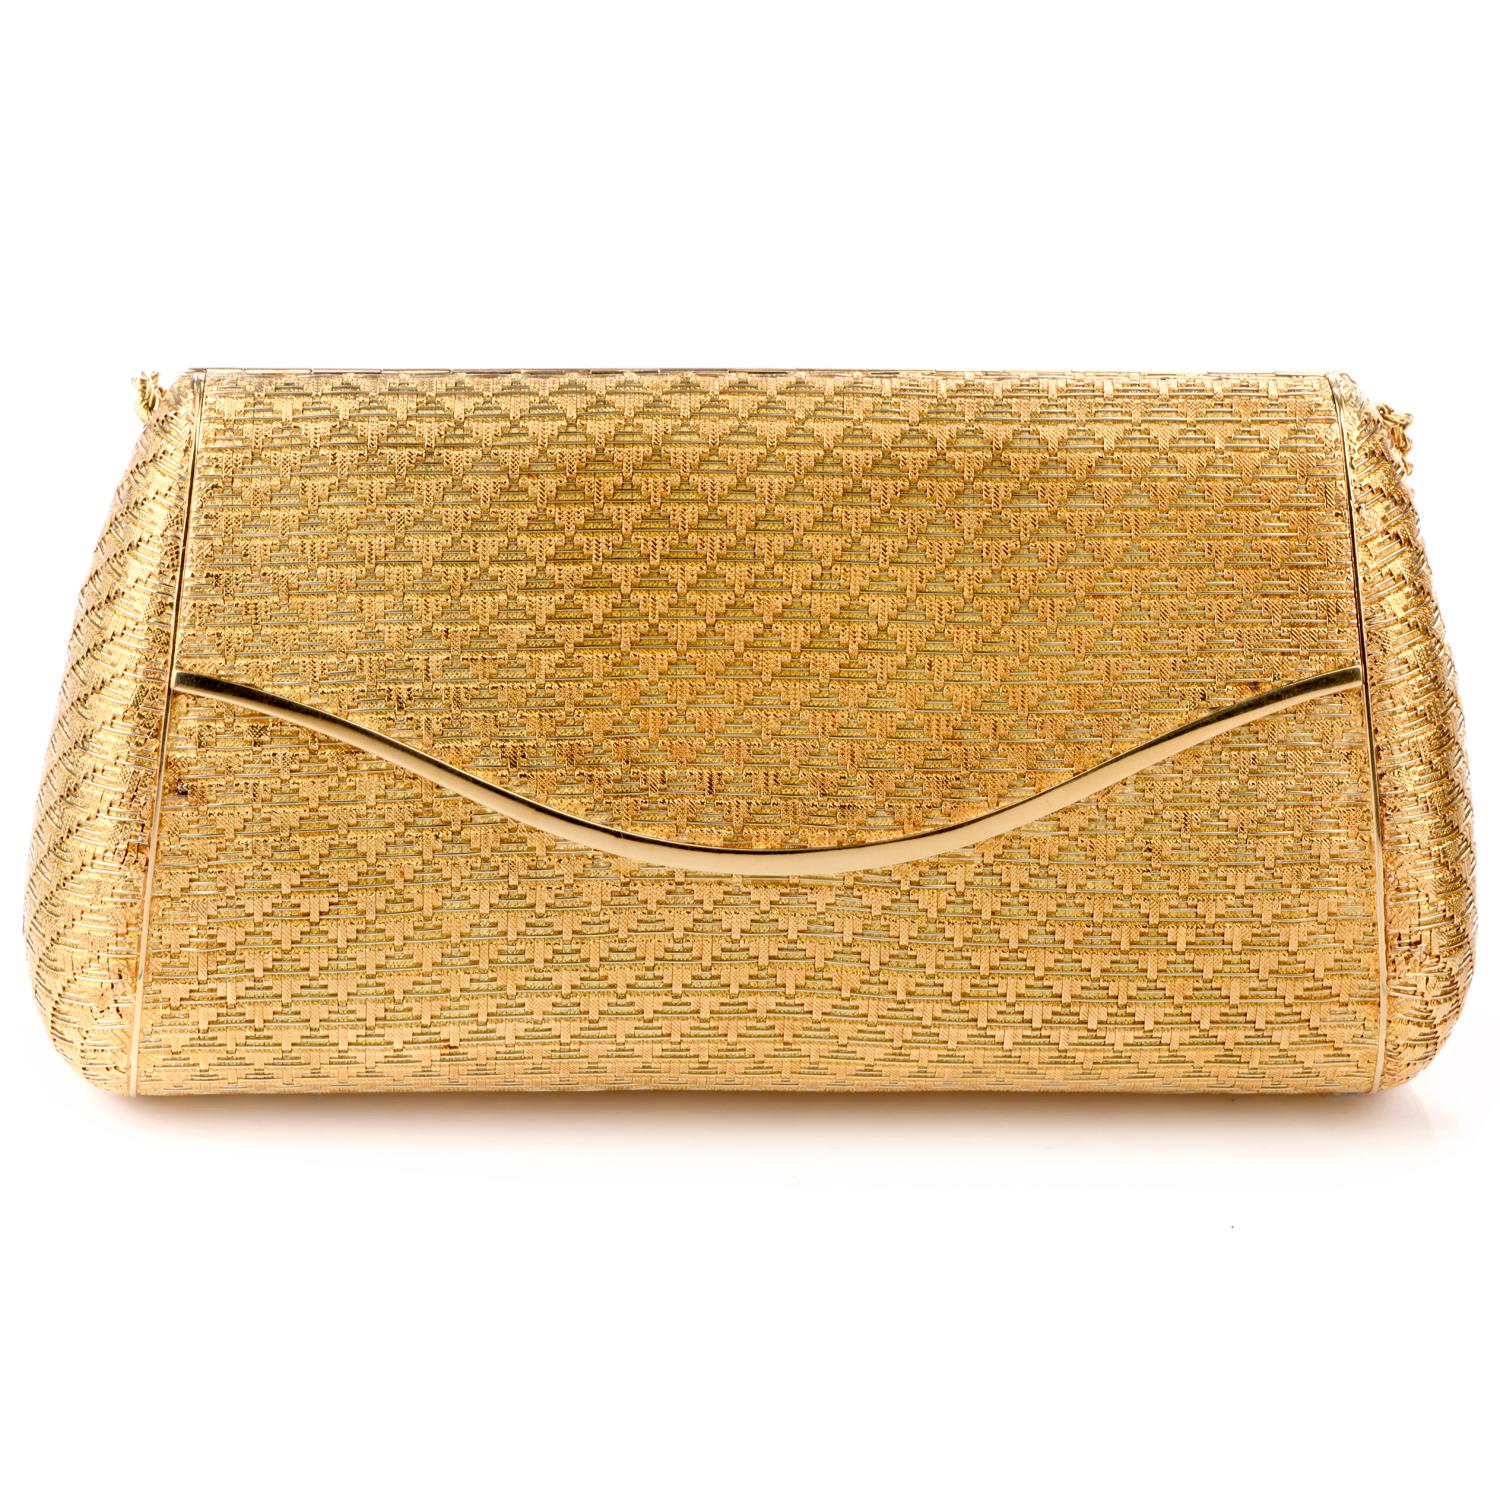 Vintage Italian 18 Karat Yellow Gold Ladies Clutch Purse 408.6 Grams In Excellent Condition For Sale In Miami, FL